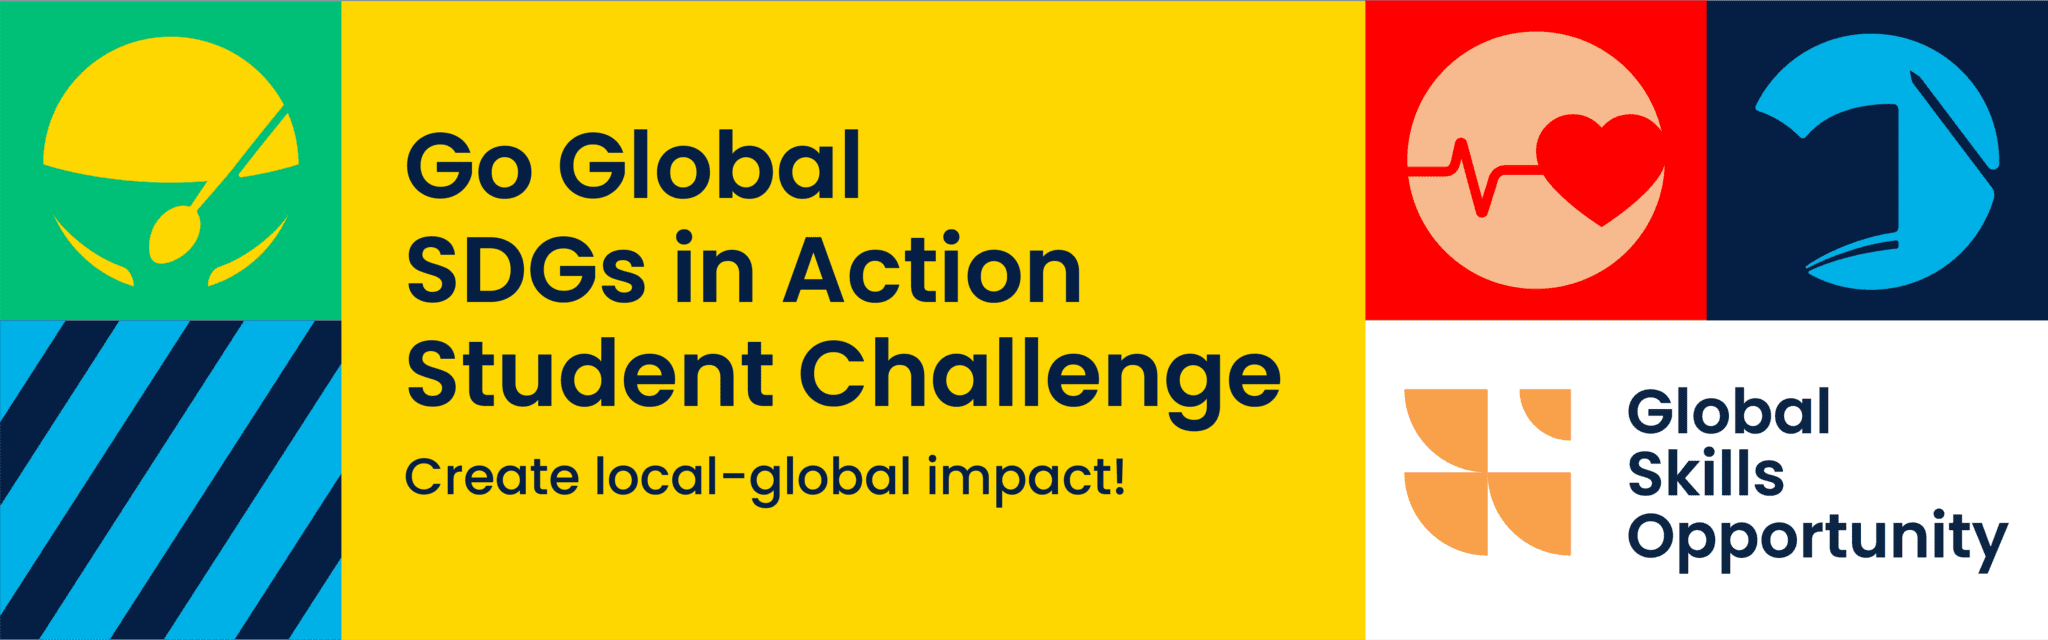 Go Global SDGS in Action Student Challenge - Create a local-global impact! logo - Global skills opportunity